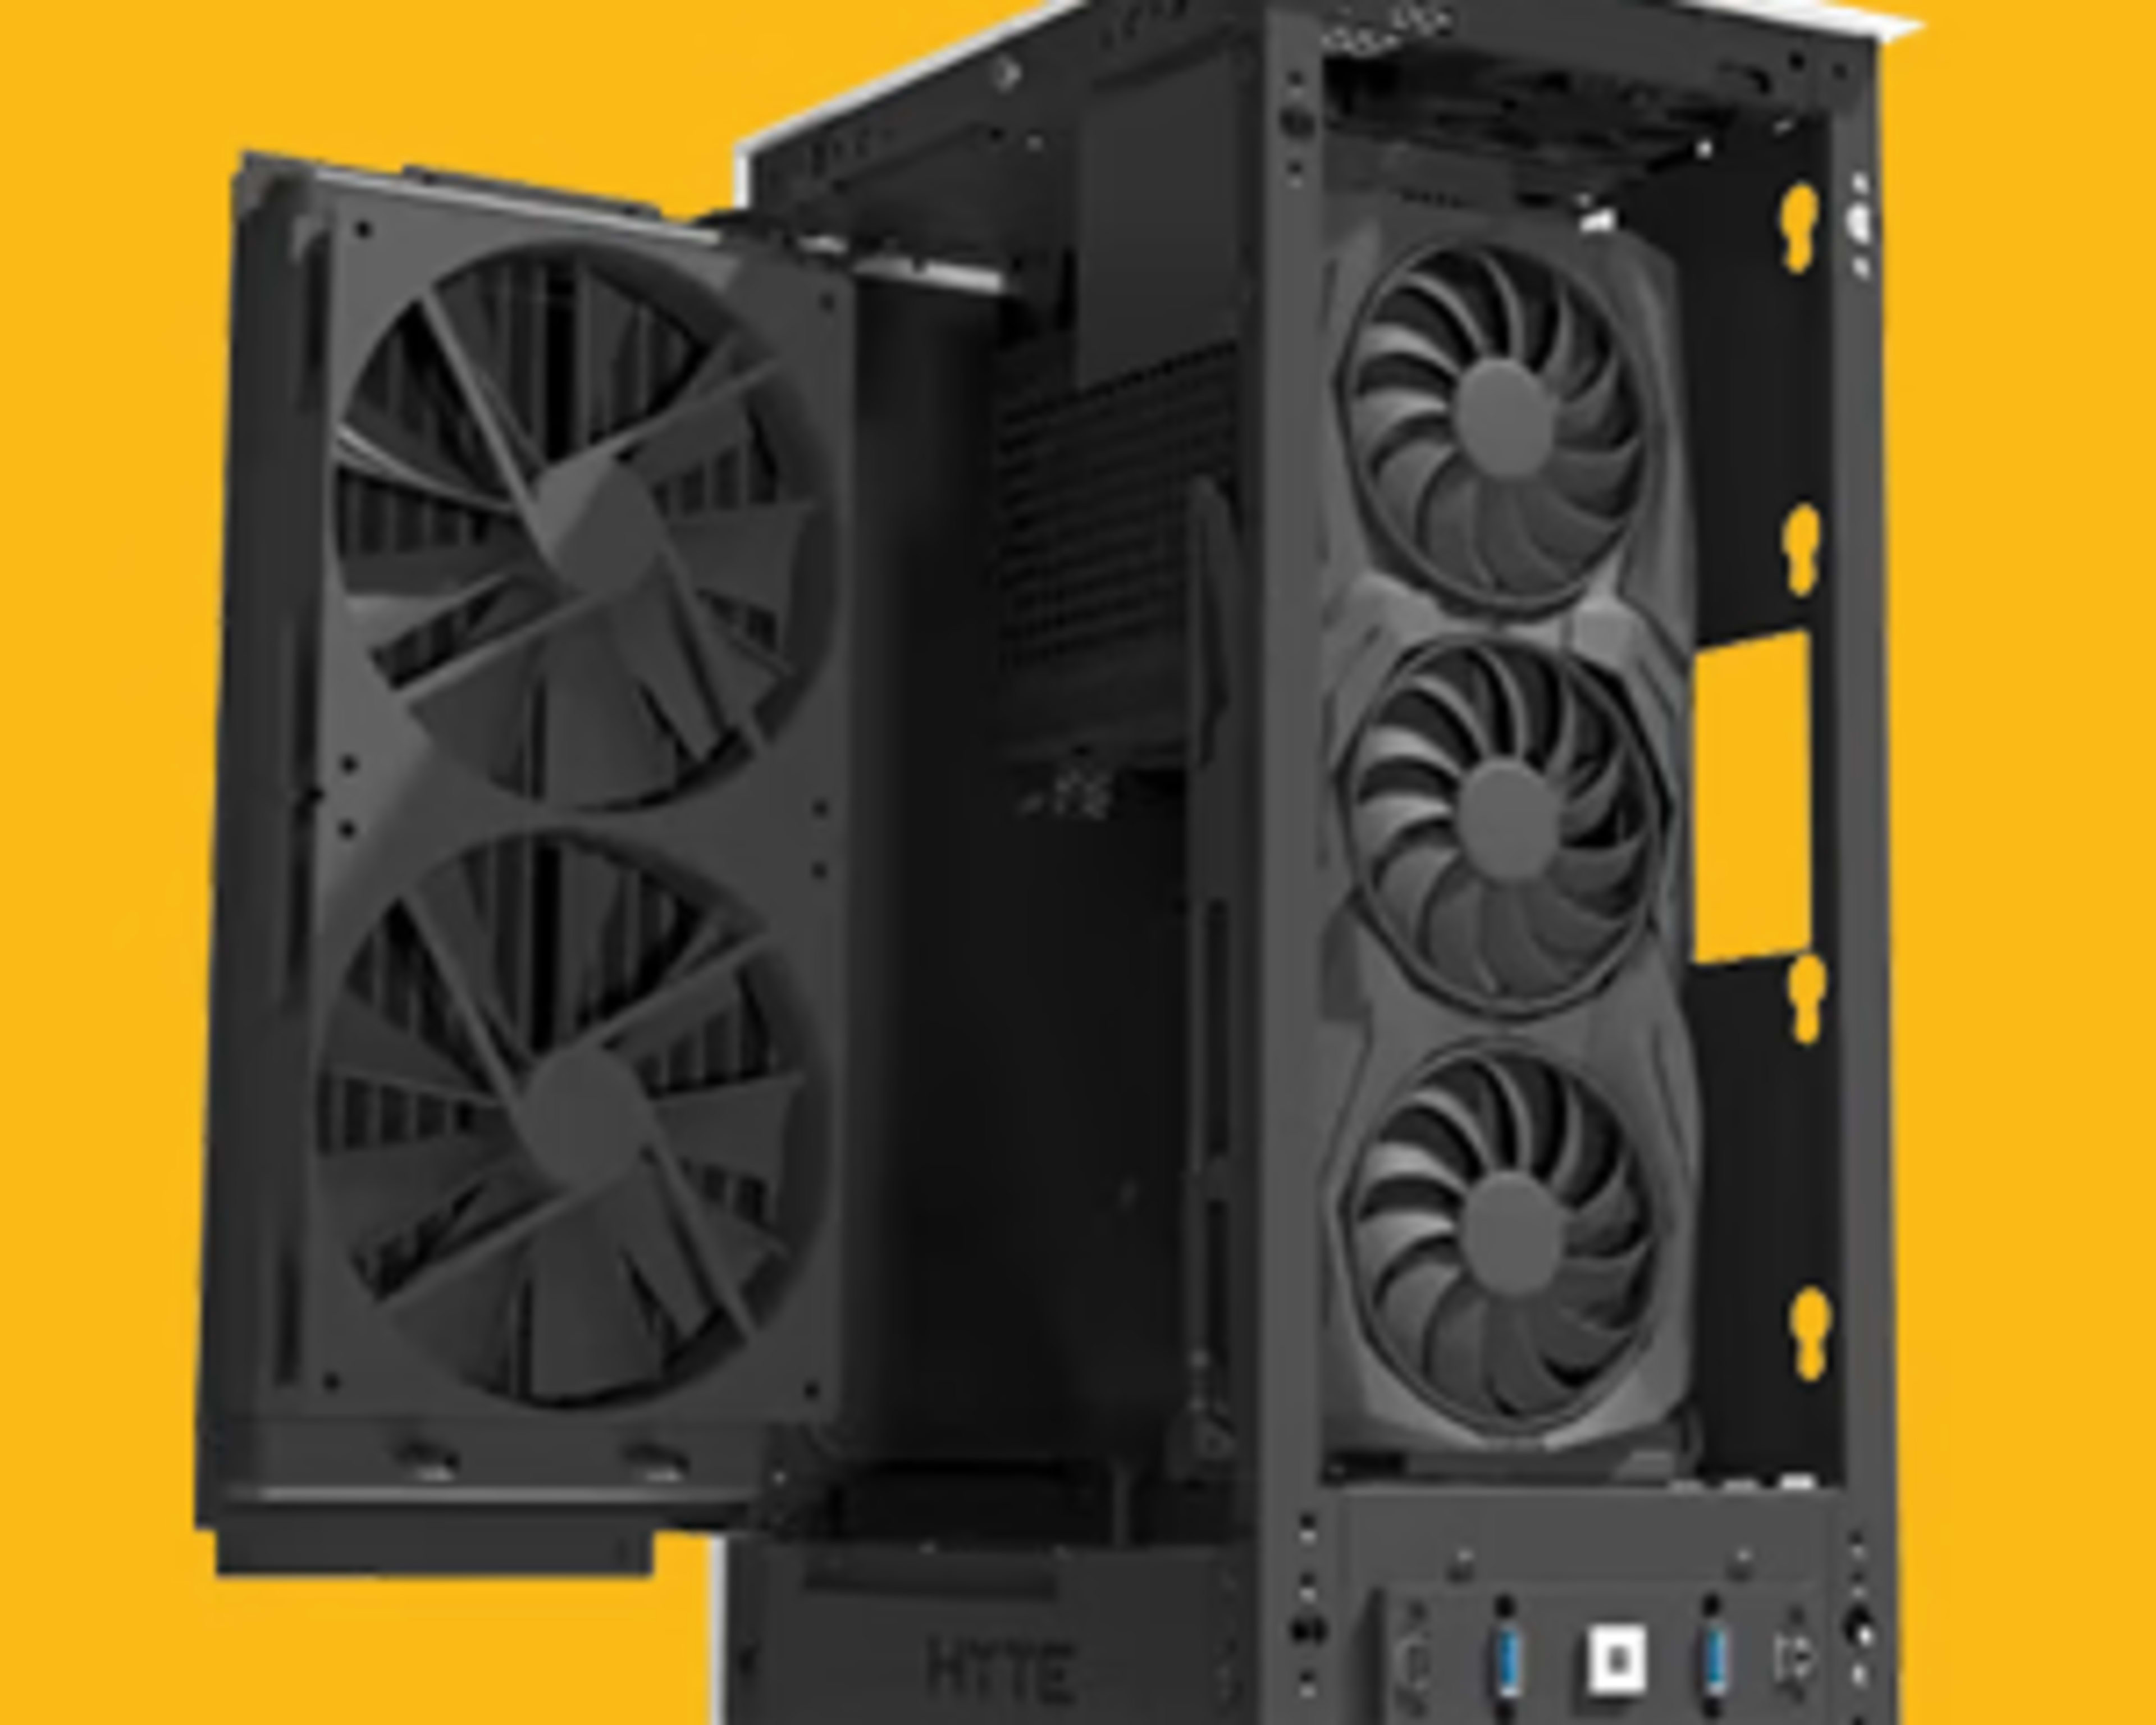 CASE + PSU! HYTE REVOLT 3 Small Form Factor ITX Case with 700W 80+ Gold SFX Power Supply, Whit